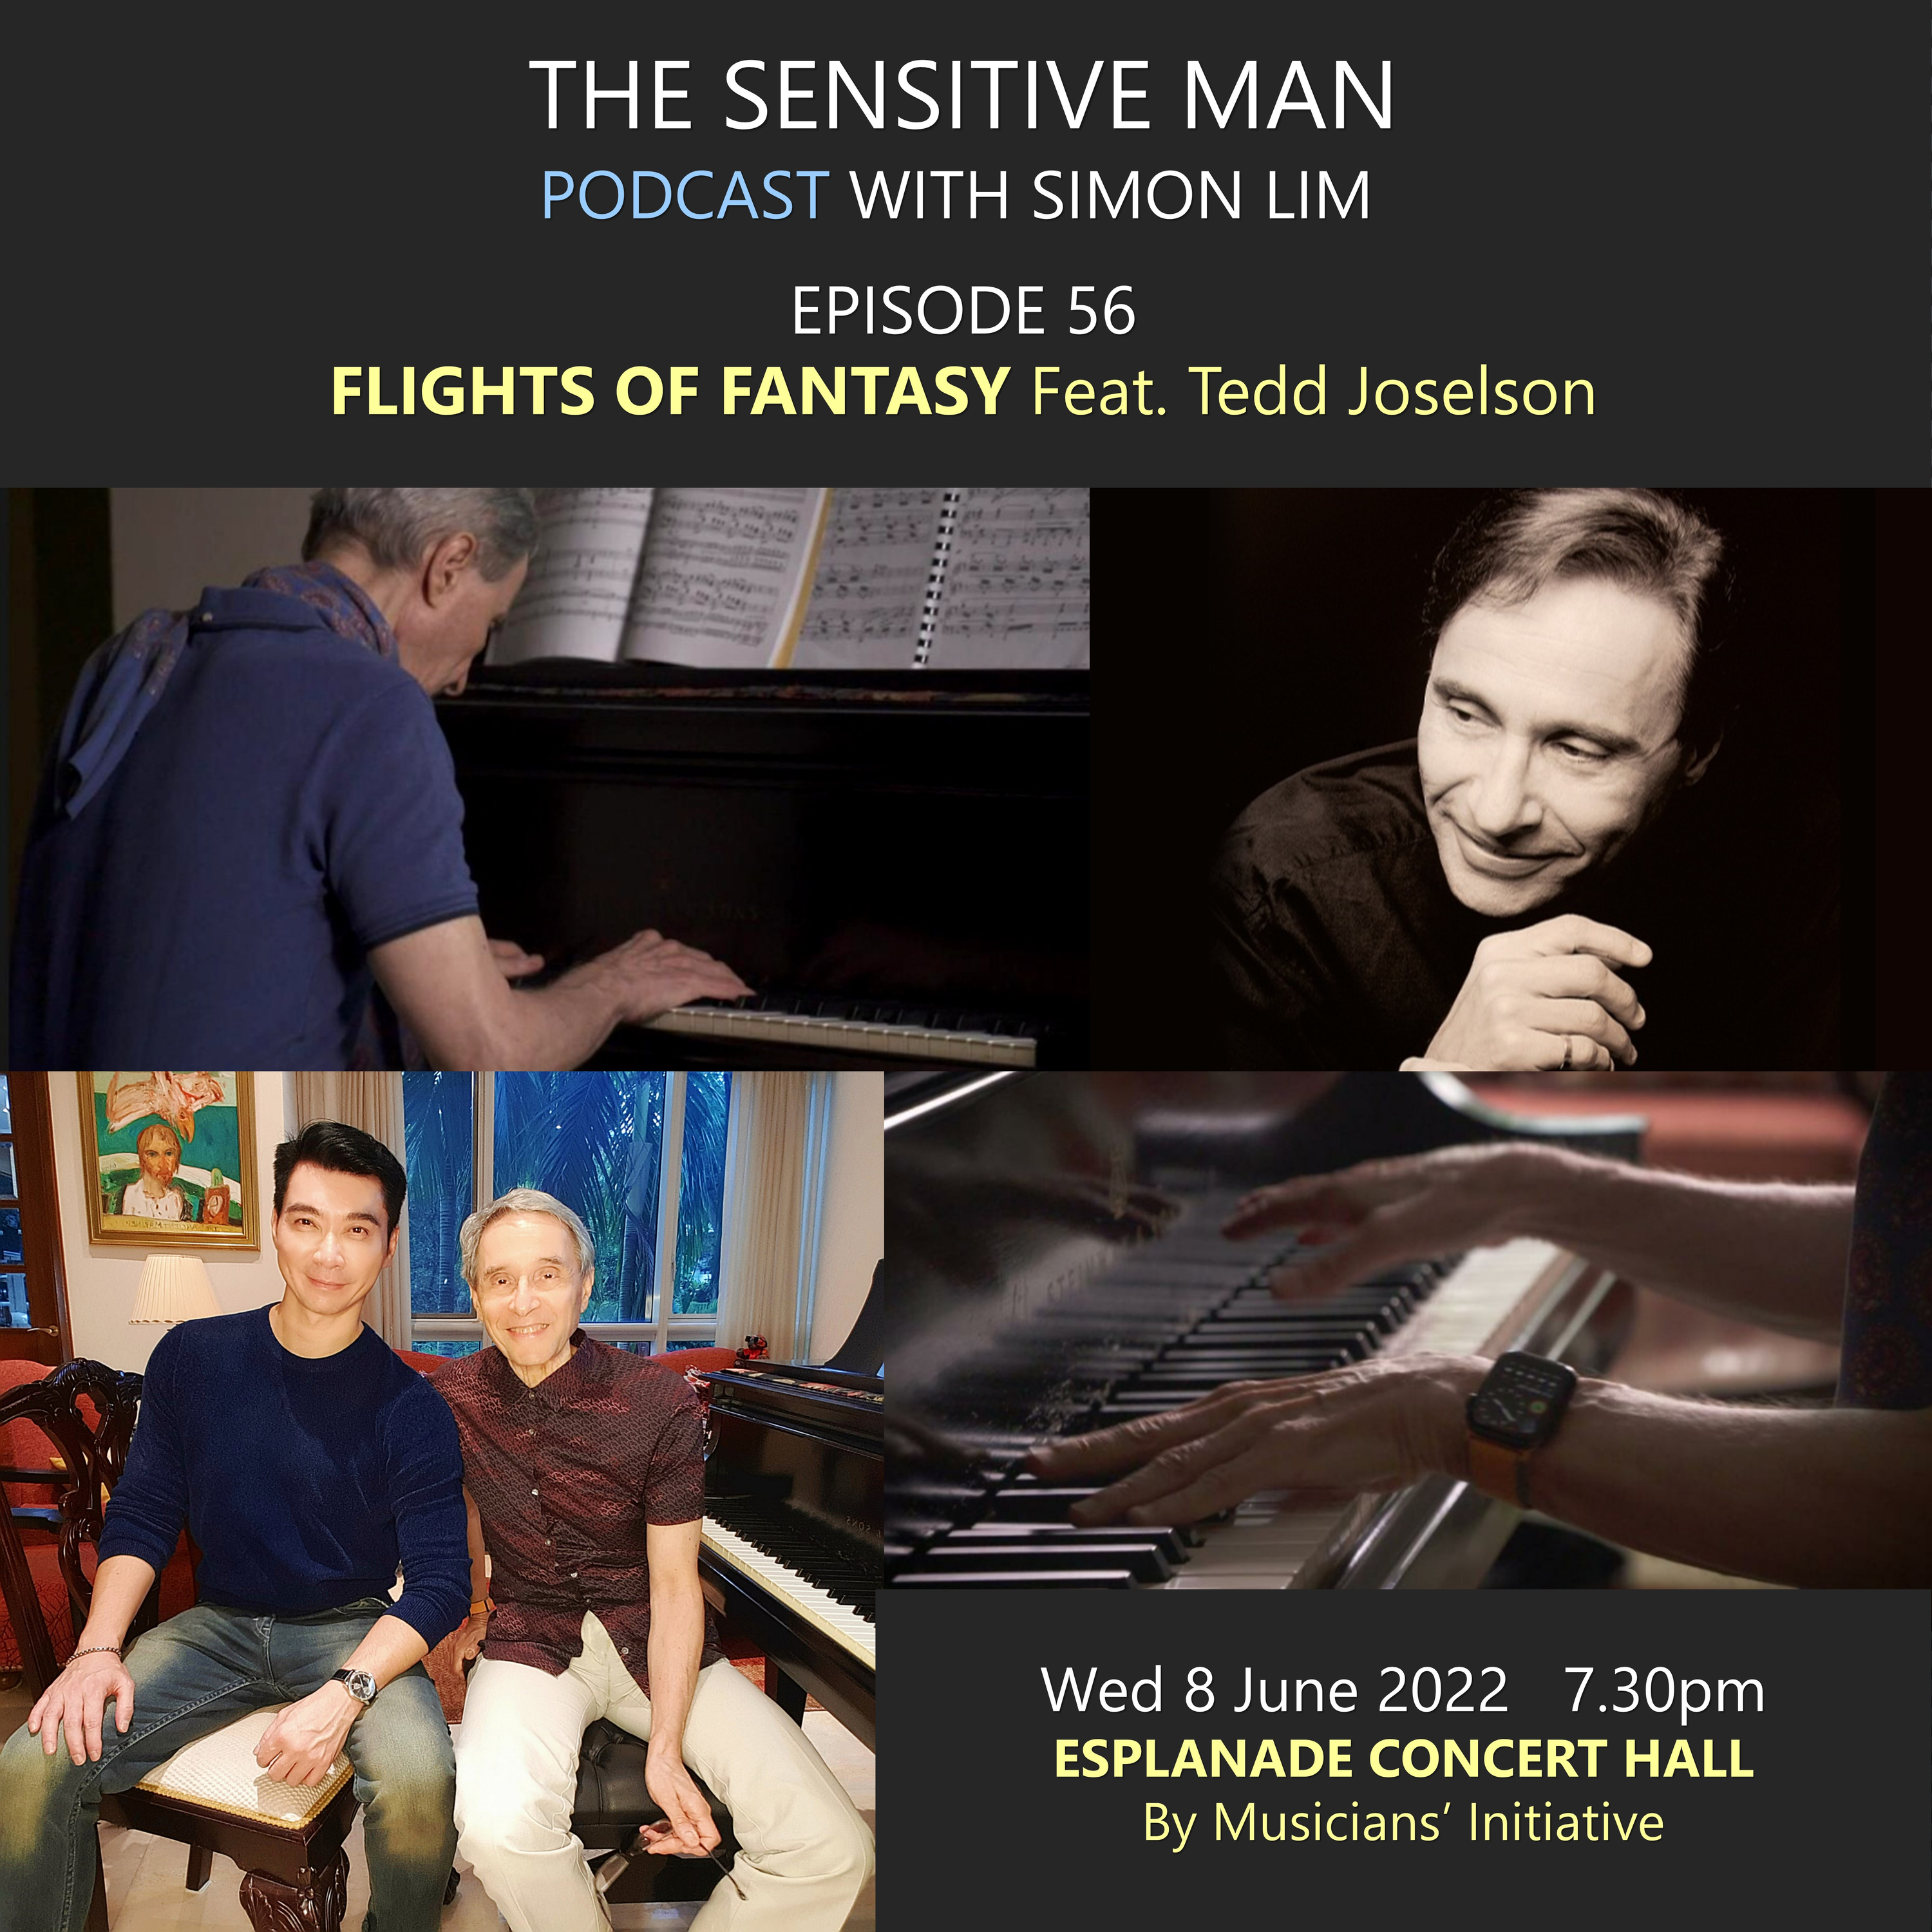 FLIGHTS OF FANTASY Feat.  Acclaimed Pianist Tedd Joselson